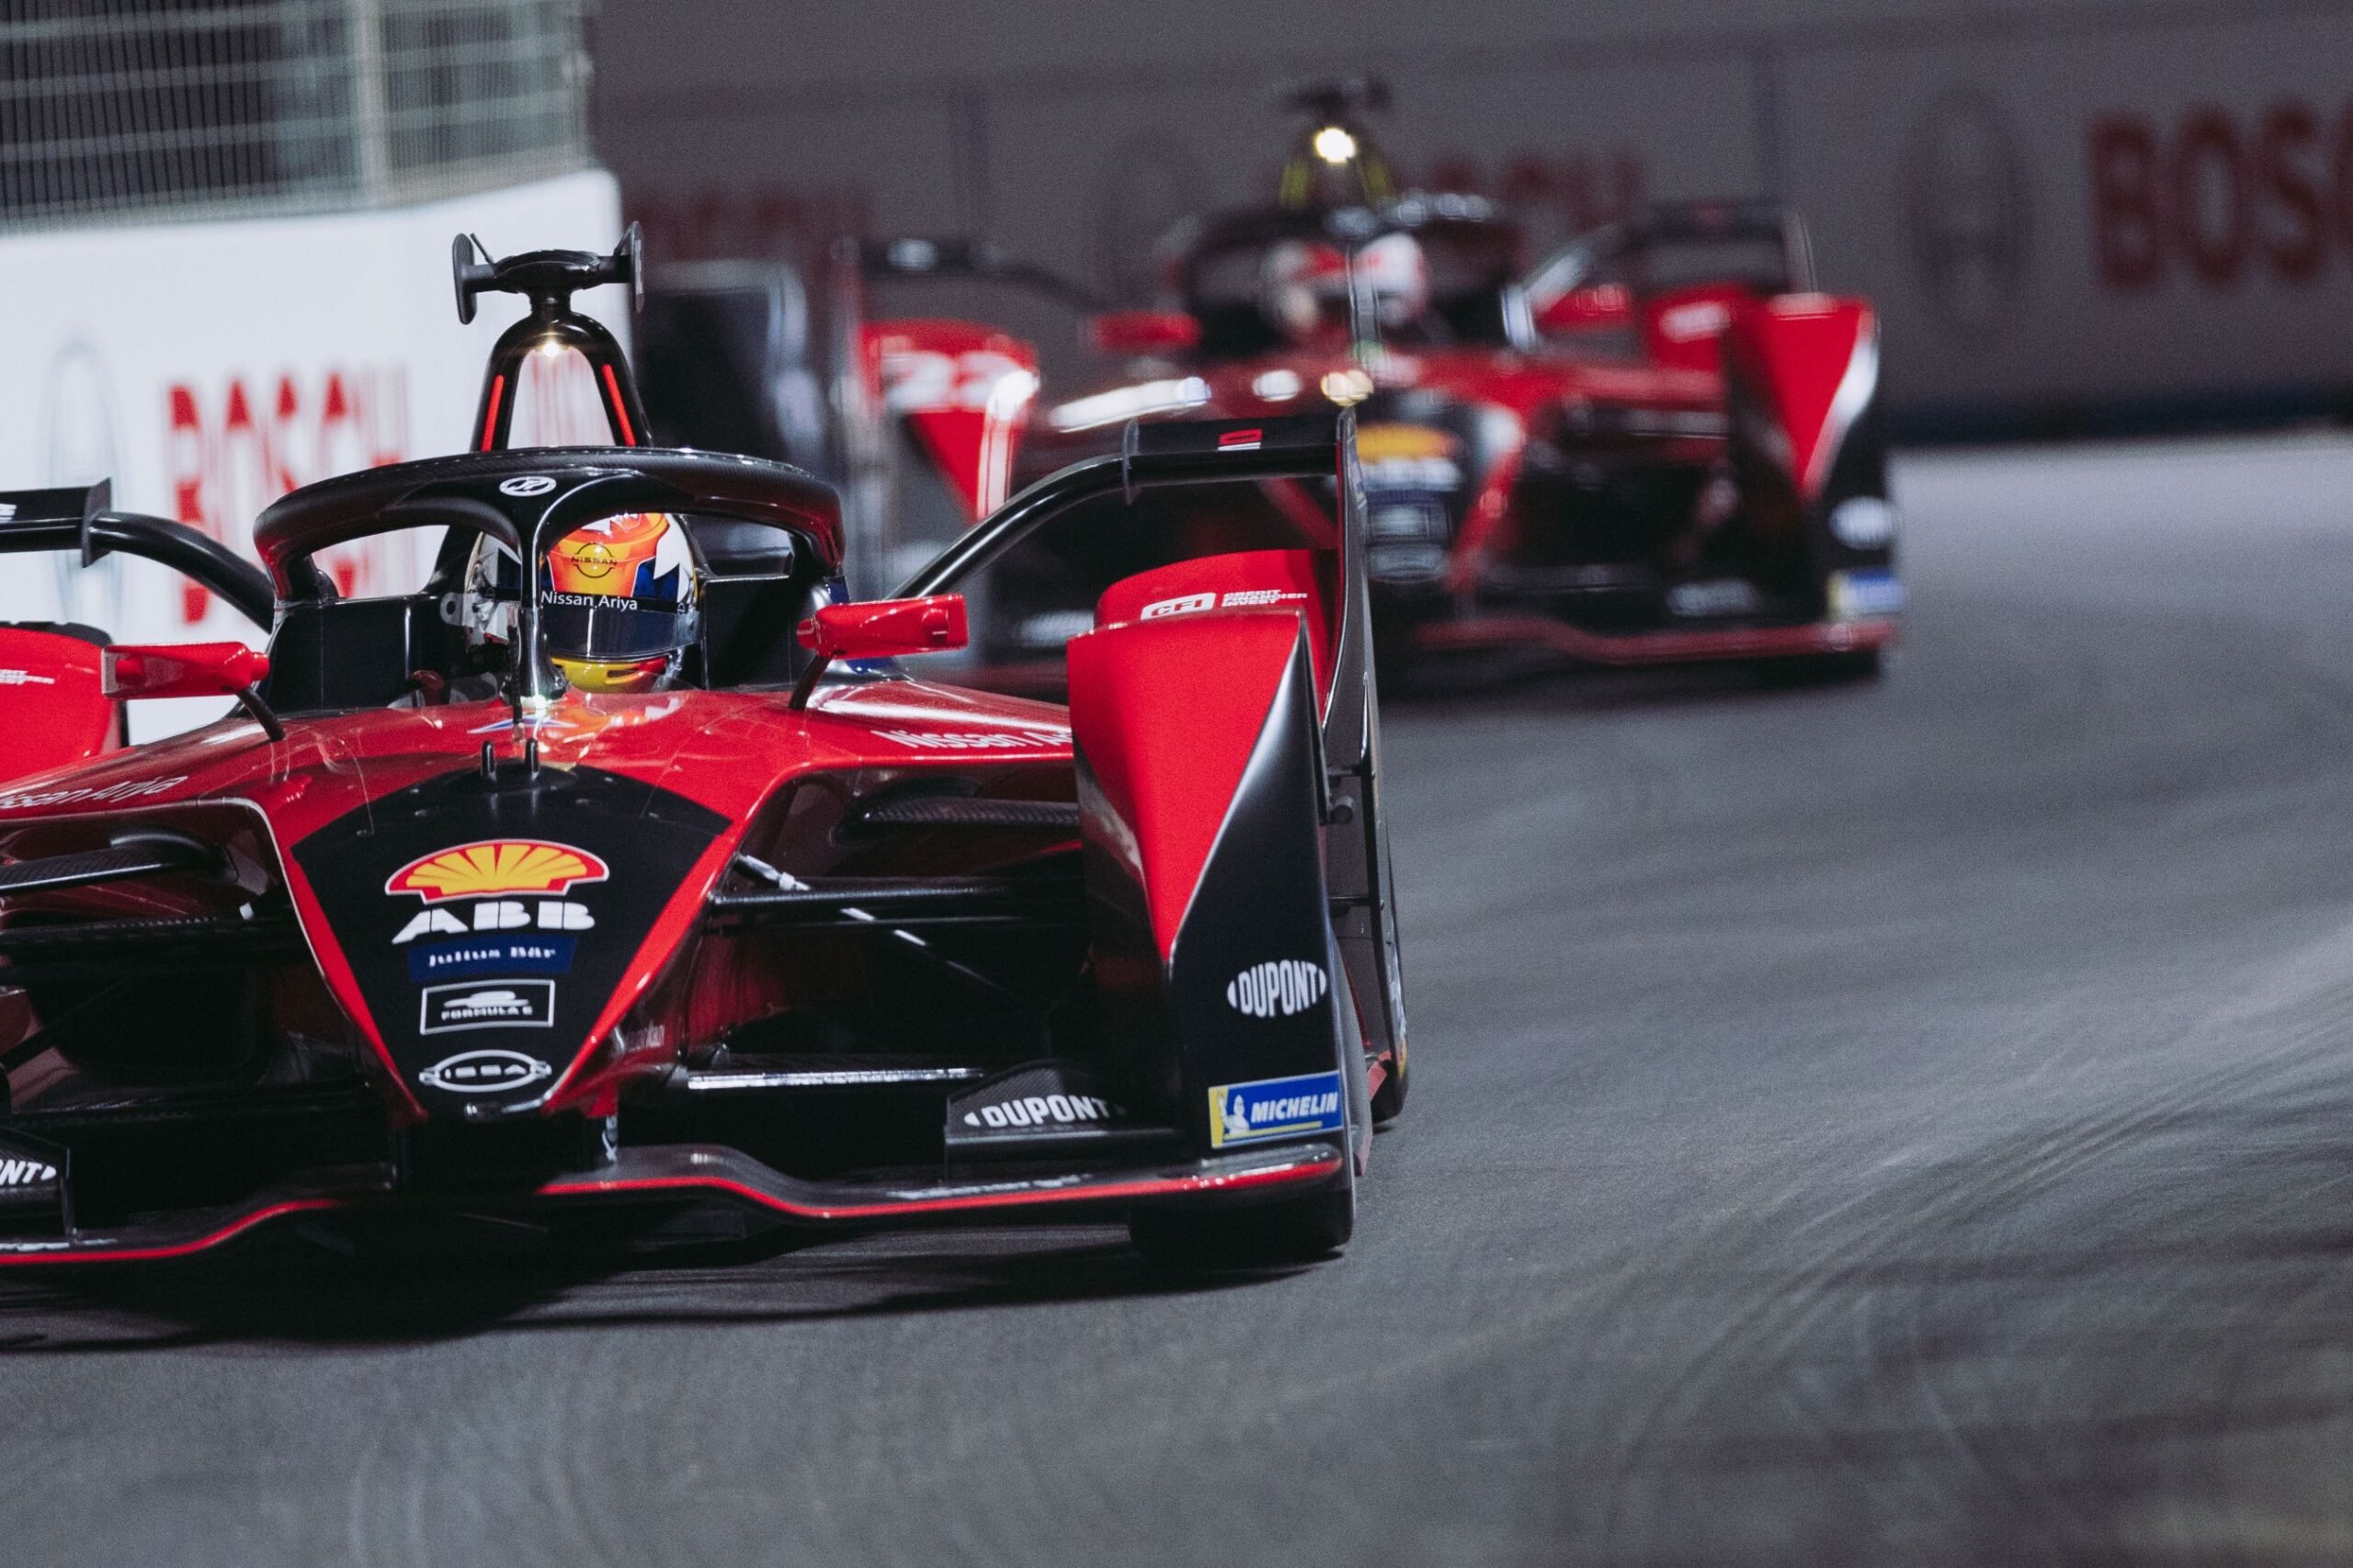 Nissan acquire e.dams race team to compete in Formula E racing